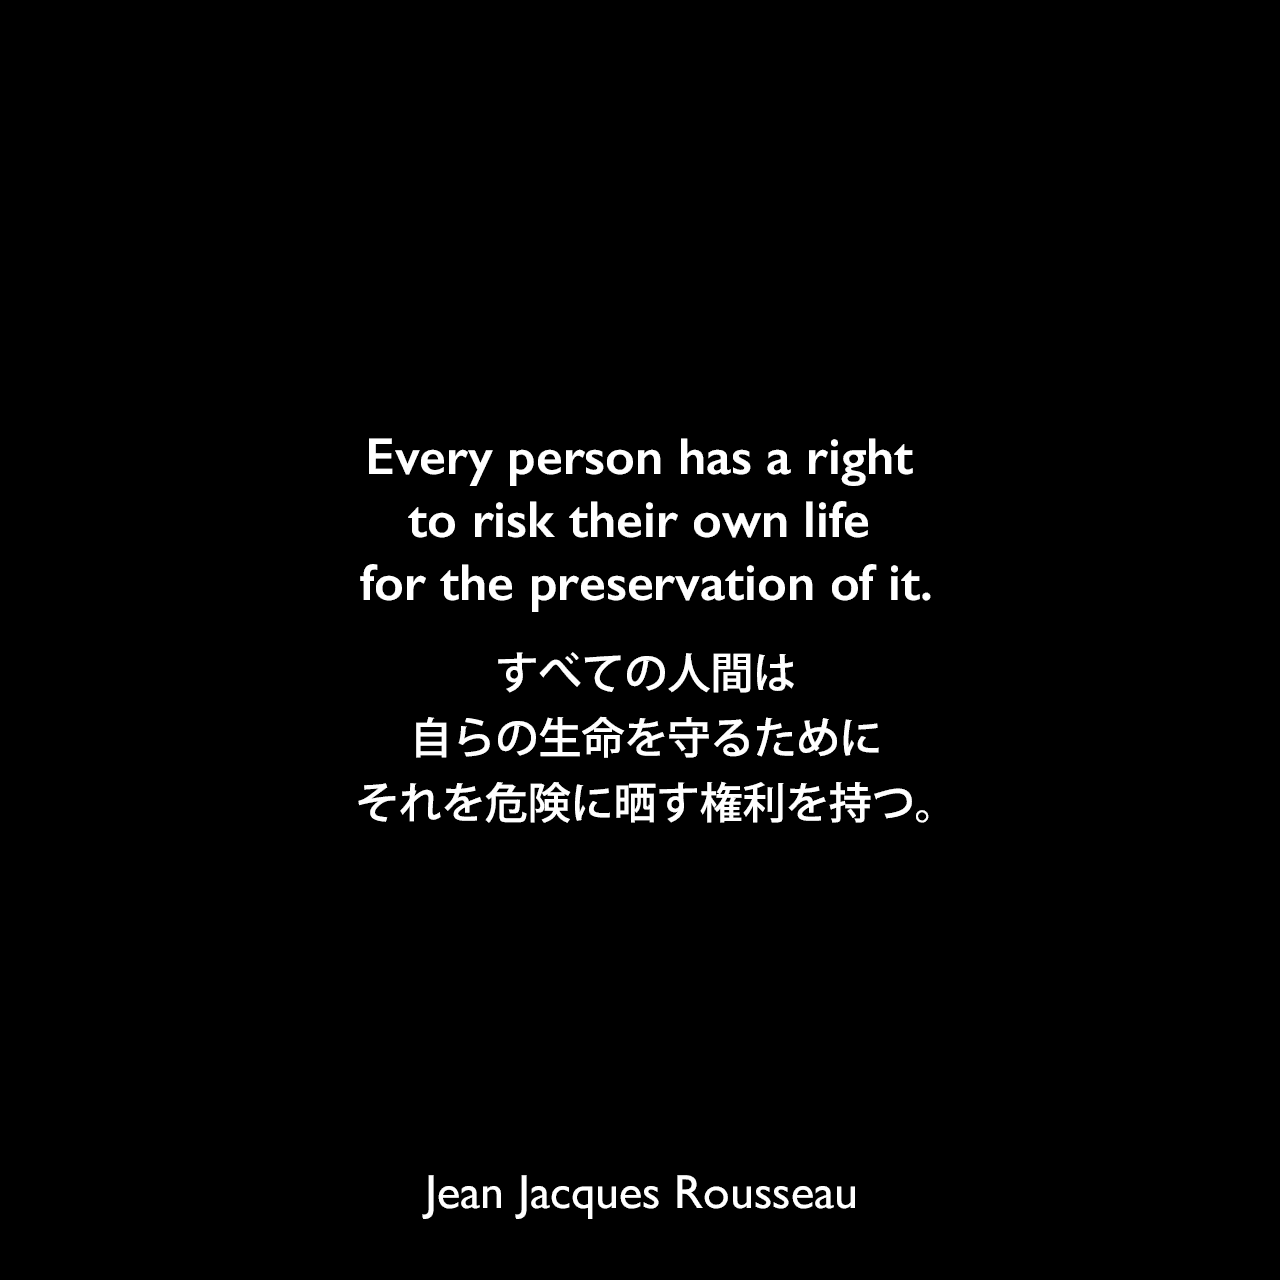 Every person has a right to risk their own life for the preservation of it.すべての人間は自らの生命を守るためにそれを危険に晒す権利を持つ。Jean Jacques Rousseau